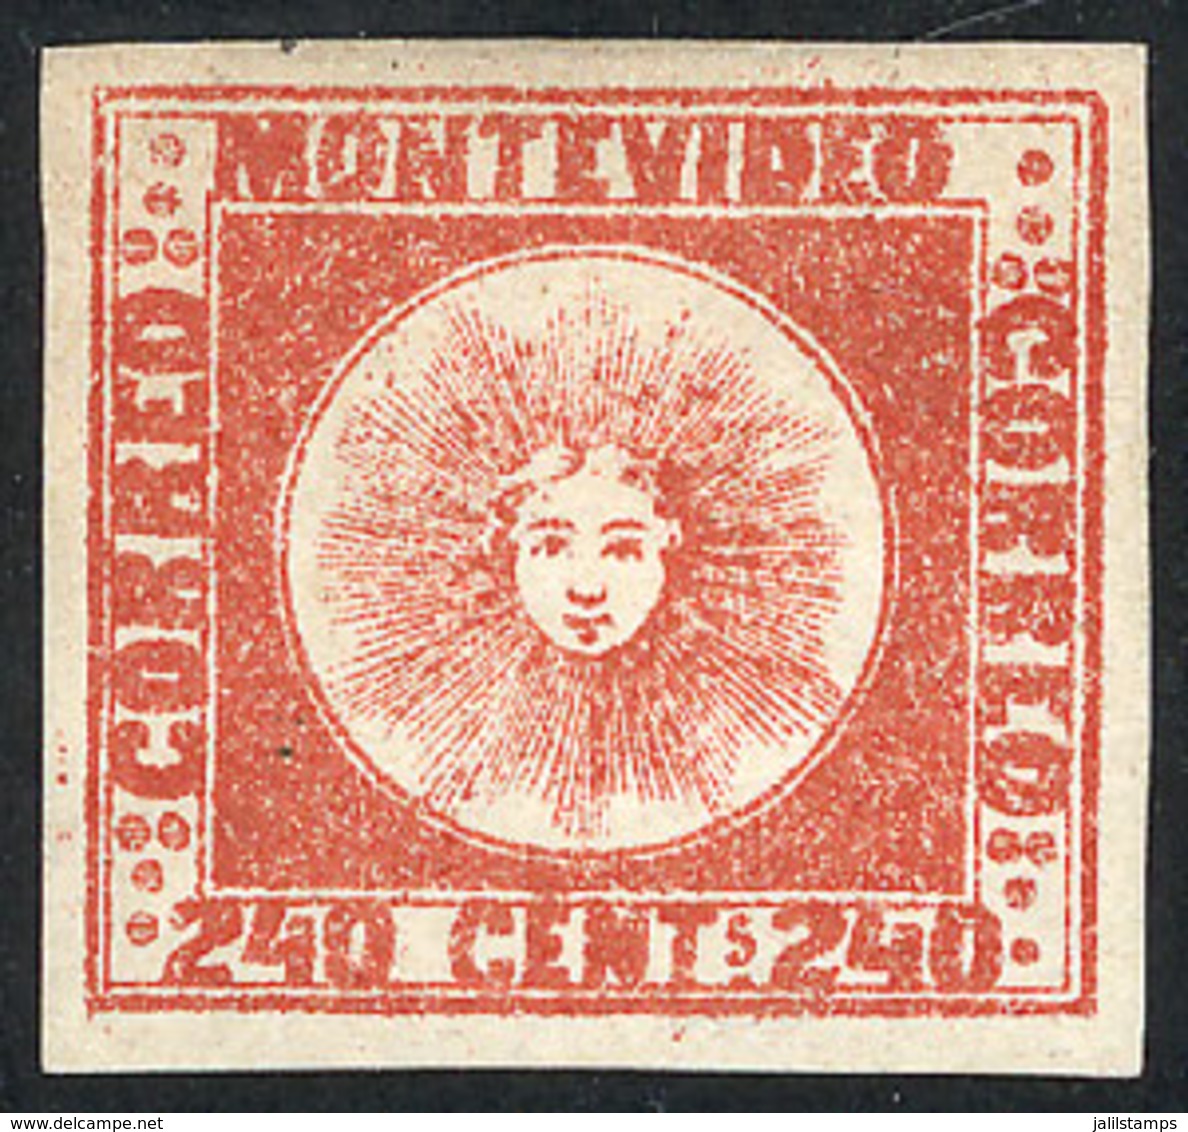 URUGUAY: Yvert 6, 1858 240c. Red, Mint Without Gum, Wide Margins, Excellent Quality! - Uruguay